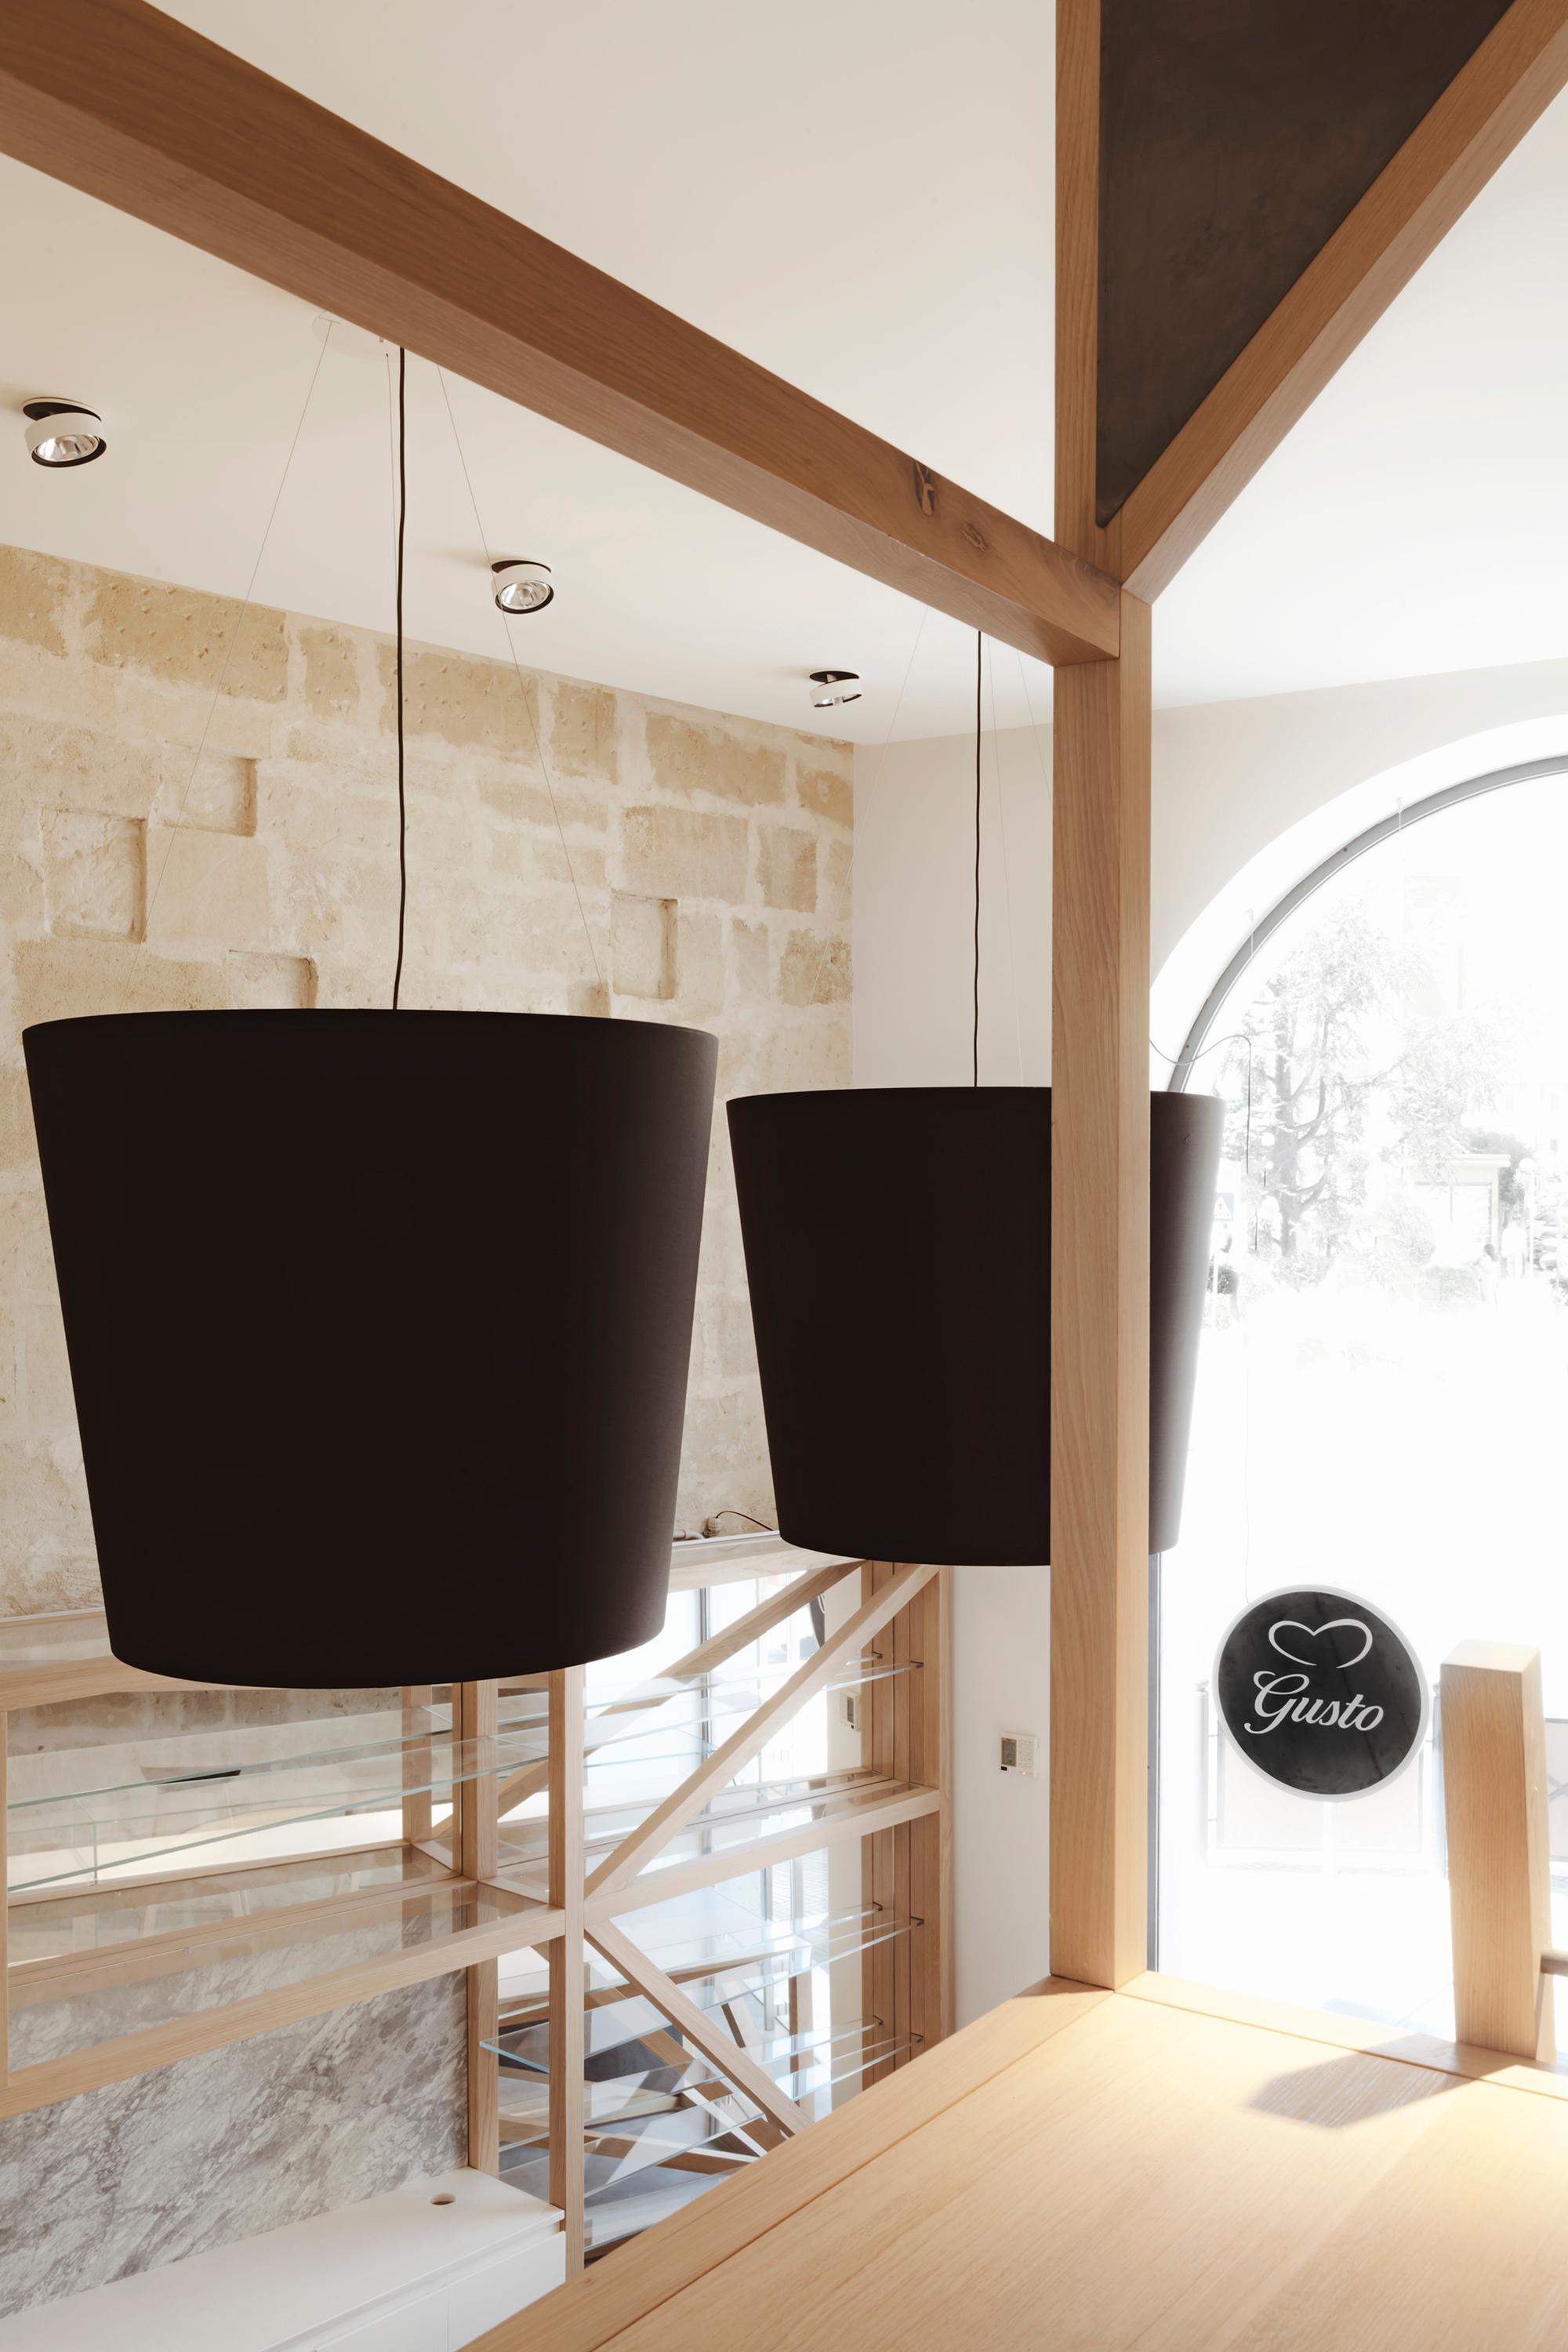 Hanging lamp direct / indirect light. Metal structure, black color fabric shade and white inside.

Technical specifications
Materials
Structure: Aluminum
Diffuser: Fabric

Bulbs
LED: 1 x 20 w E27
Flux: 2452 lm
Kelvin: 2700°
Class